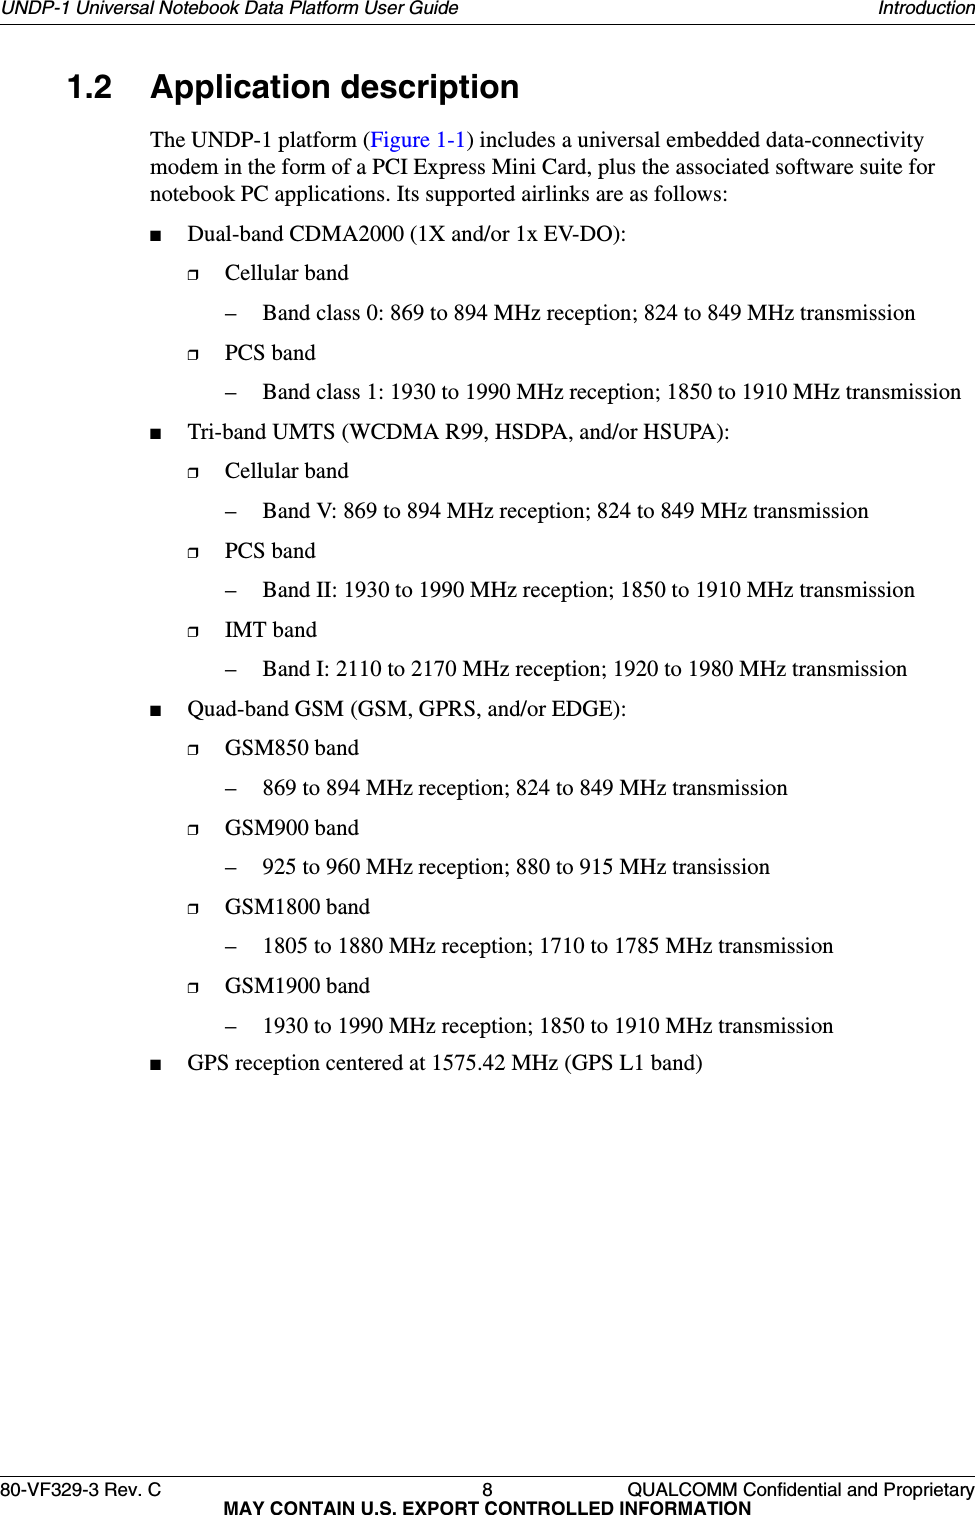 80-VF329-3 Rev. C 8 QUALCOMM Confidential and ProprietaryMAY CONTAIN U.S. EXPORT CONTROLLED INFORMATIONUNDP-1 Universal Notebook Data Platform User Guide Introduction1.2 Application descriptionThe UNDP-1 platform (Figure 1-1) includes a universal embedded data-connectivity modem in the form of a PCI Express Mini Card, plus the associated software suite for notebook PC applications. Its supported airlinks are as follows:■Dual-band CDMA2000 (1X and/or 1x EV-DO):❒Cellular band– Band class 0: 869 to 894 MHz reception; 824 to 849 MHz transmission ❒PCS band– Band class 1: 1930 to 1990 MHz reception; 1850 to 1910 MHz transmission ■Tri-band UMTS (WCDMA R99, HSDPA, and/or HSUPA):❒Cellular band– Band V: 869 to 894 MHz reception; 824 to 849 MHz transmission❒PCS band– Band II: 1930 to 1990 MHz reception; 1850 to 1910 MHz transmission❒IMT band– Band I: 2110 to 2170 MHz reception; 1920 to 1980 MHz transmission■Quad-band GSM (GSM, GPRS, and/or EDGE):❒GSM850 band– 869 to 894 MHz reception; 824 to 849 MHz transmission❒GSM900 band– 925 to 960 MHz reception; 880 to 915 MHz transission❒GSM1800 band– 1805 to 1880 MHz reception; 1710 to 1785 MHz transmission❒GSM1900 band– 1930 to 1990 MHz reception; 1850 to 1910 MHz transmission■GPS reception centered at 1575.42 MHz (GPS L1 band)